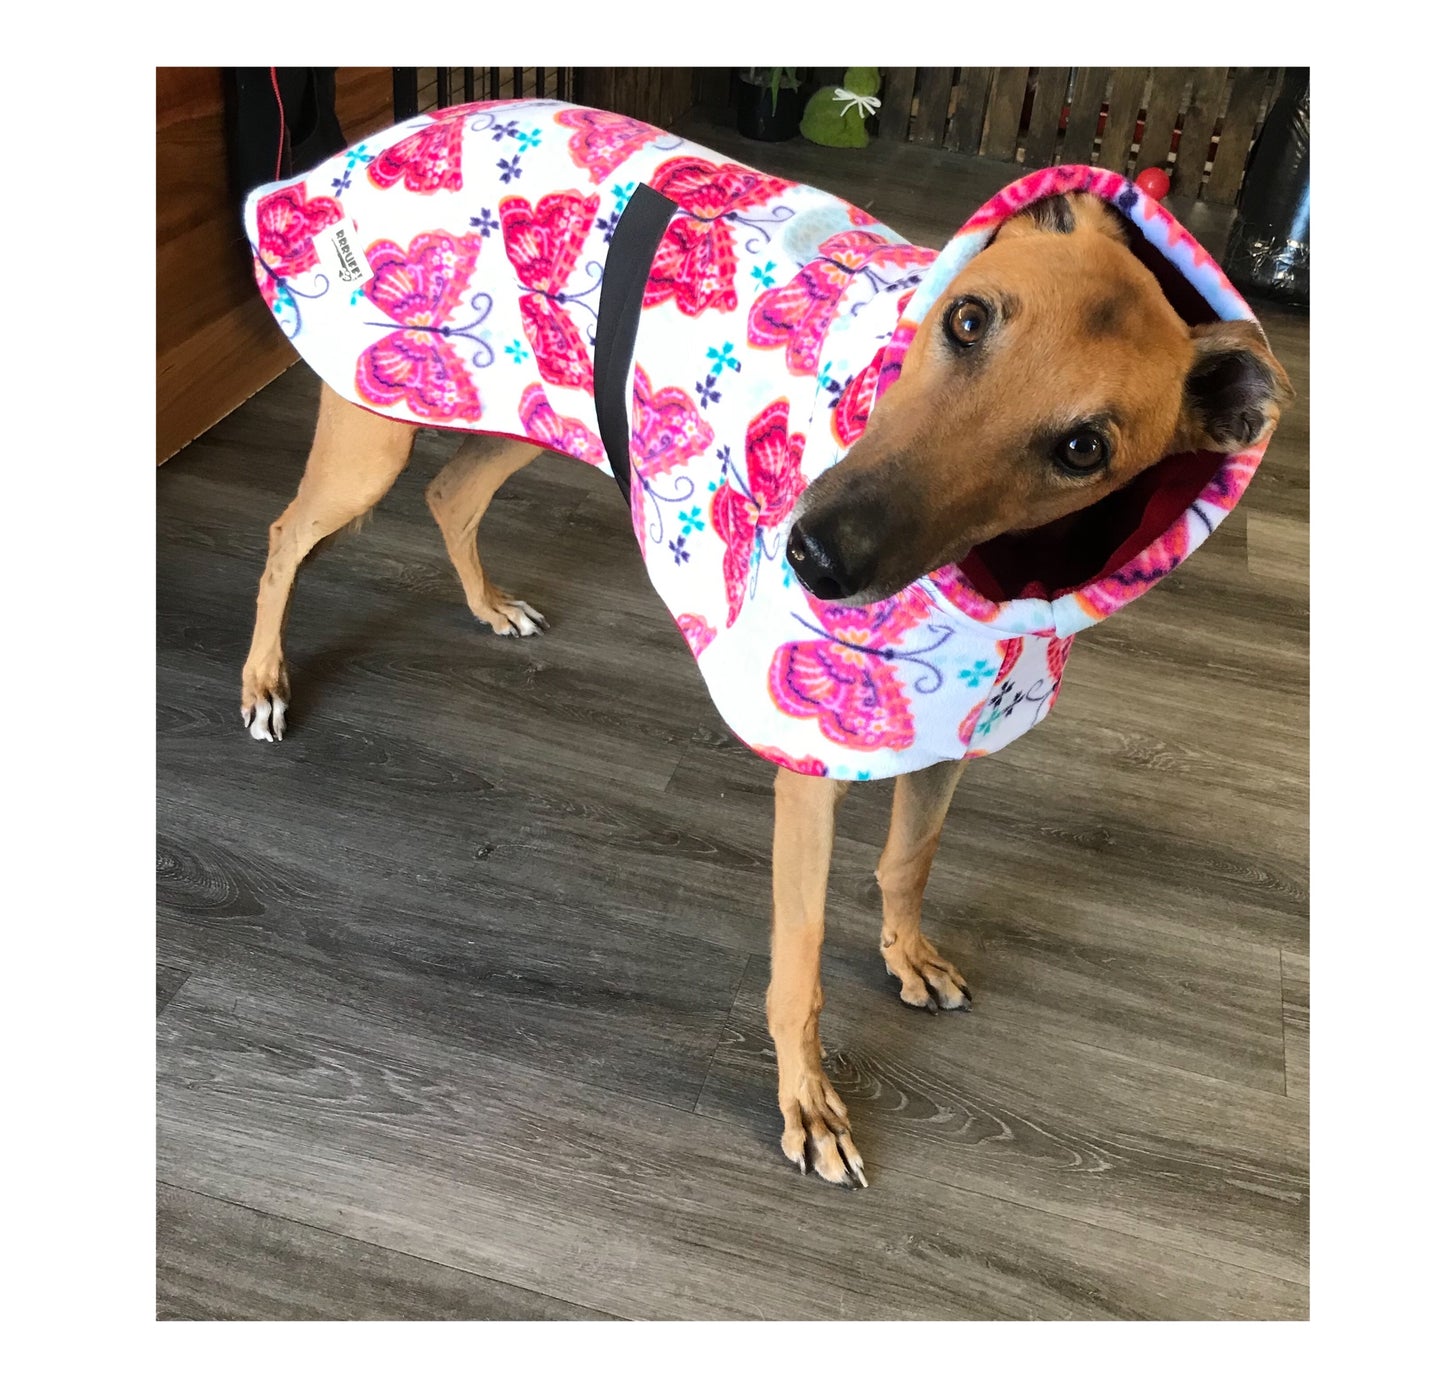 Butterfly prints greyhound Deluxe style coat rug super soft & snuggly polar fleece extra wide neck hoodie end of line